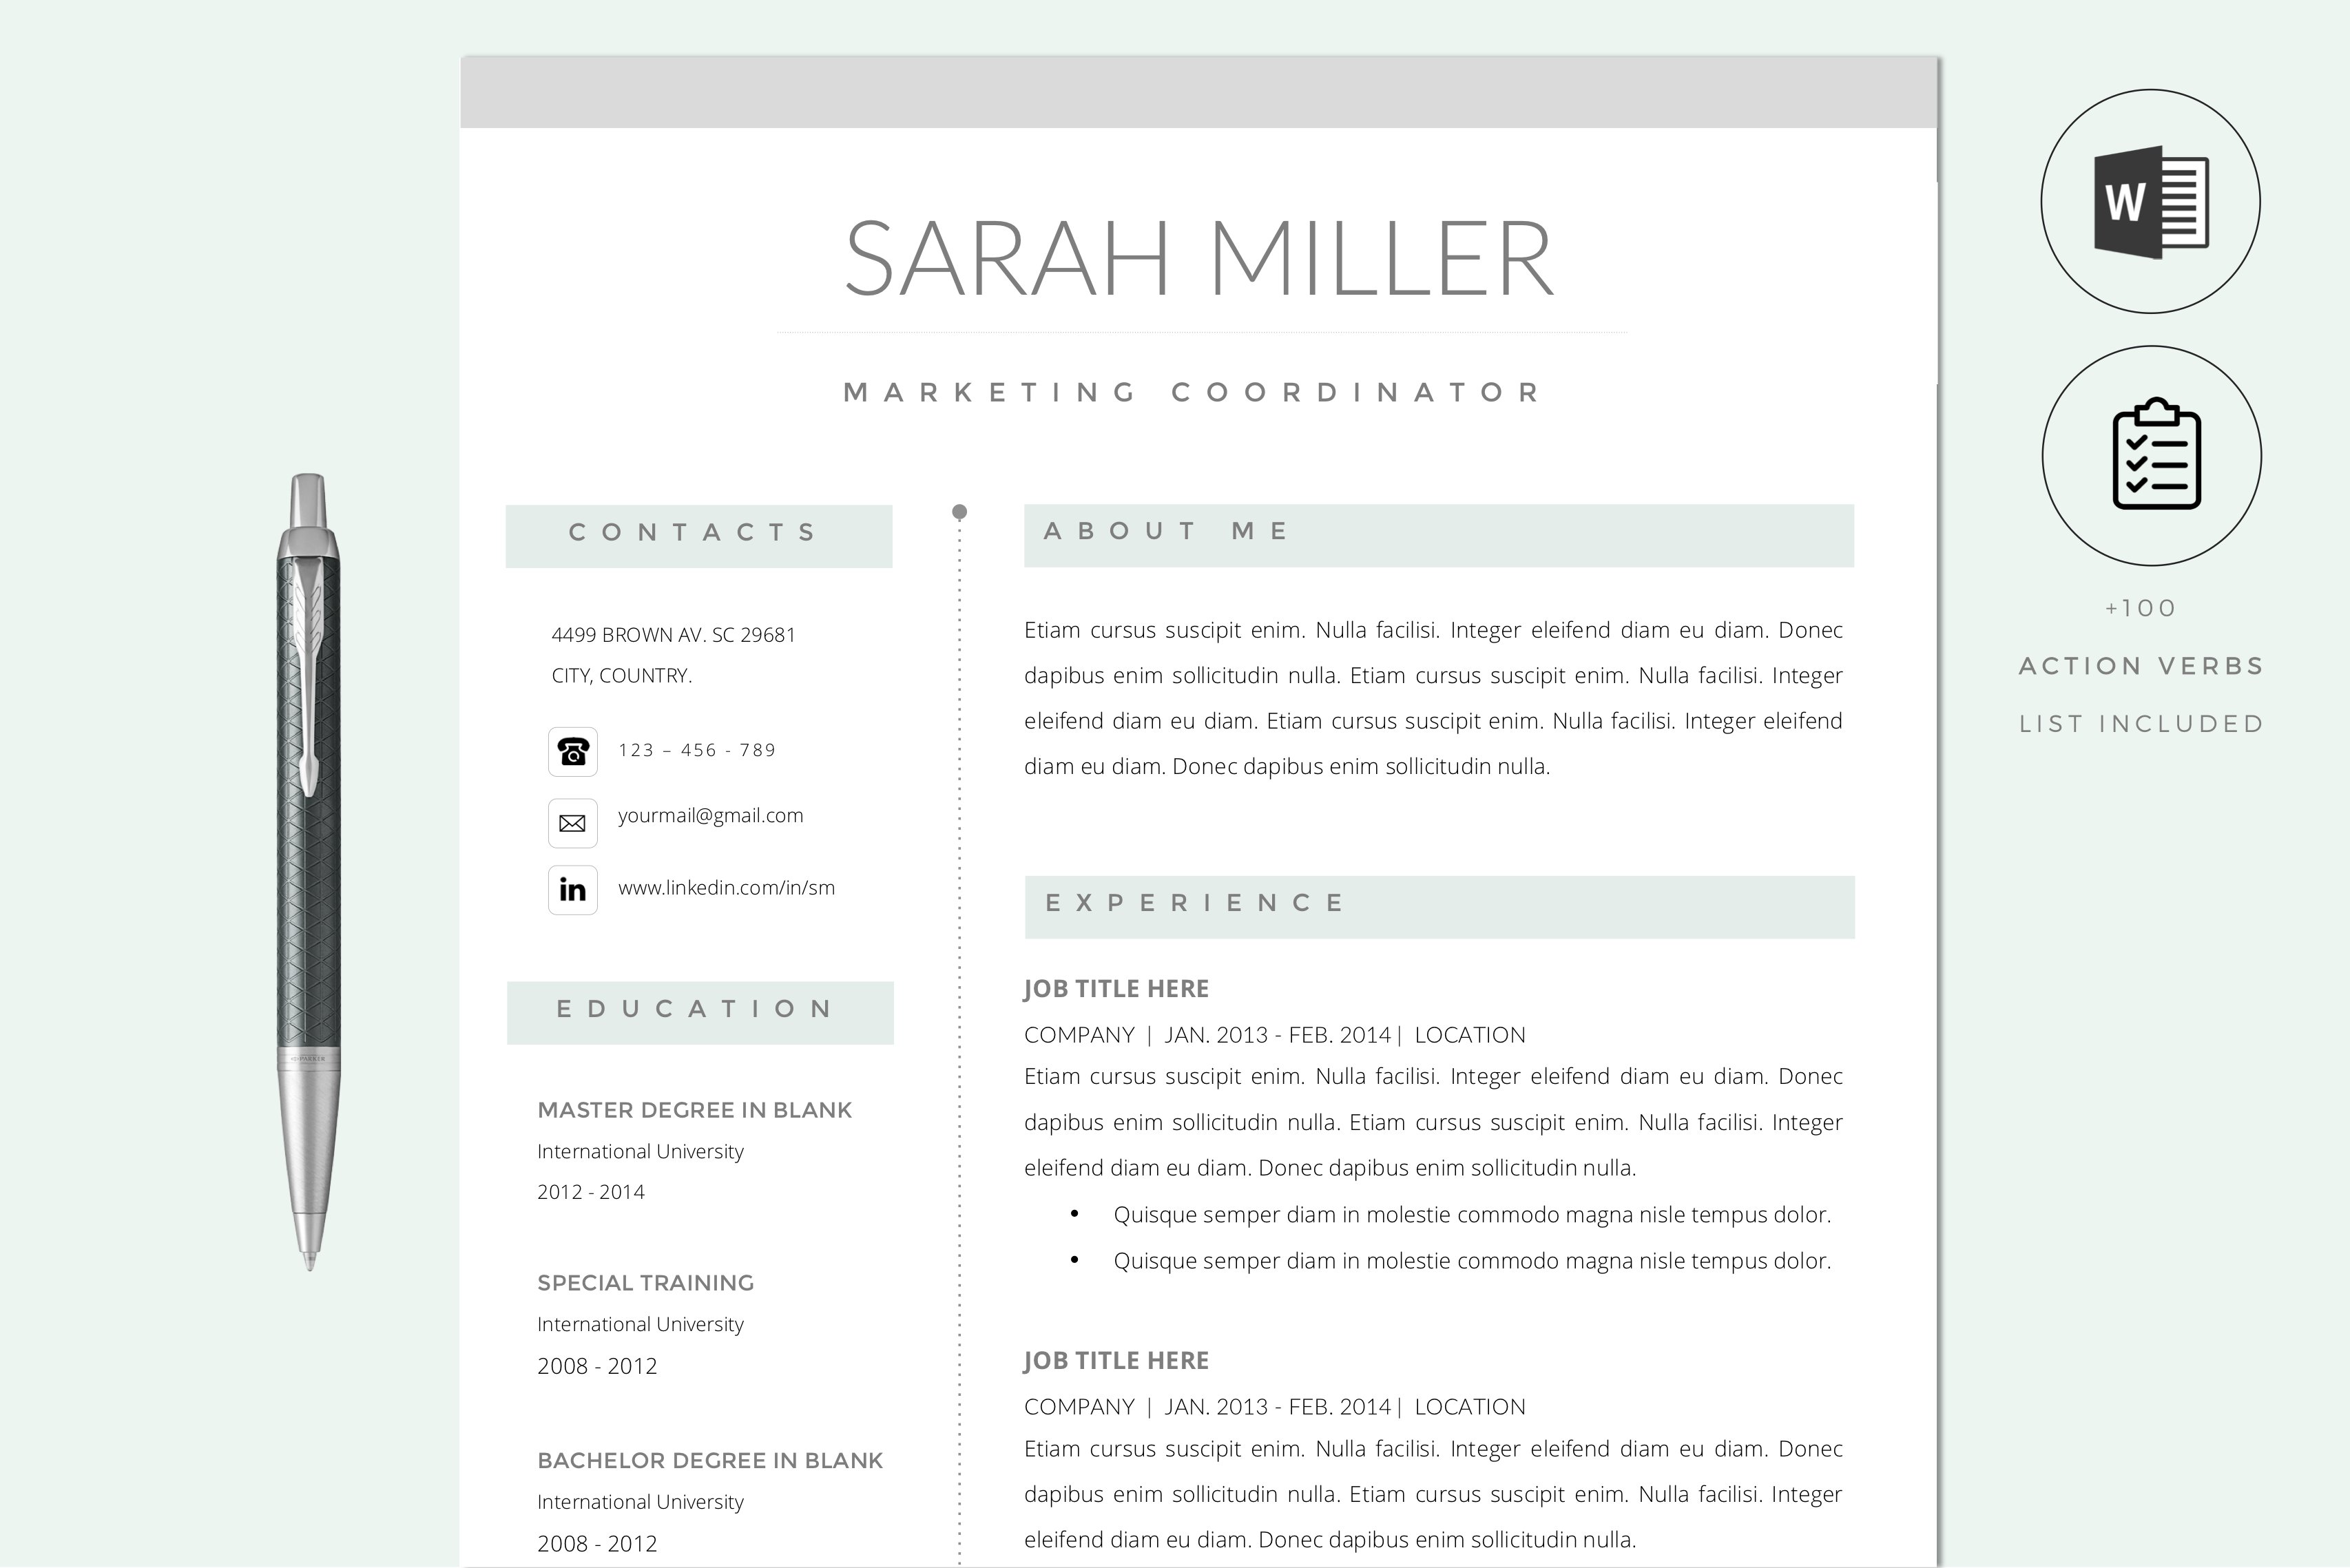 Resume CV Template & Cover Letter cover image.